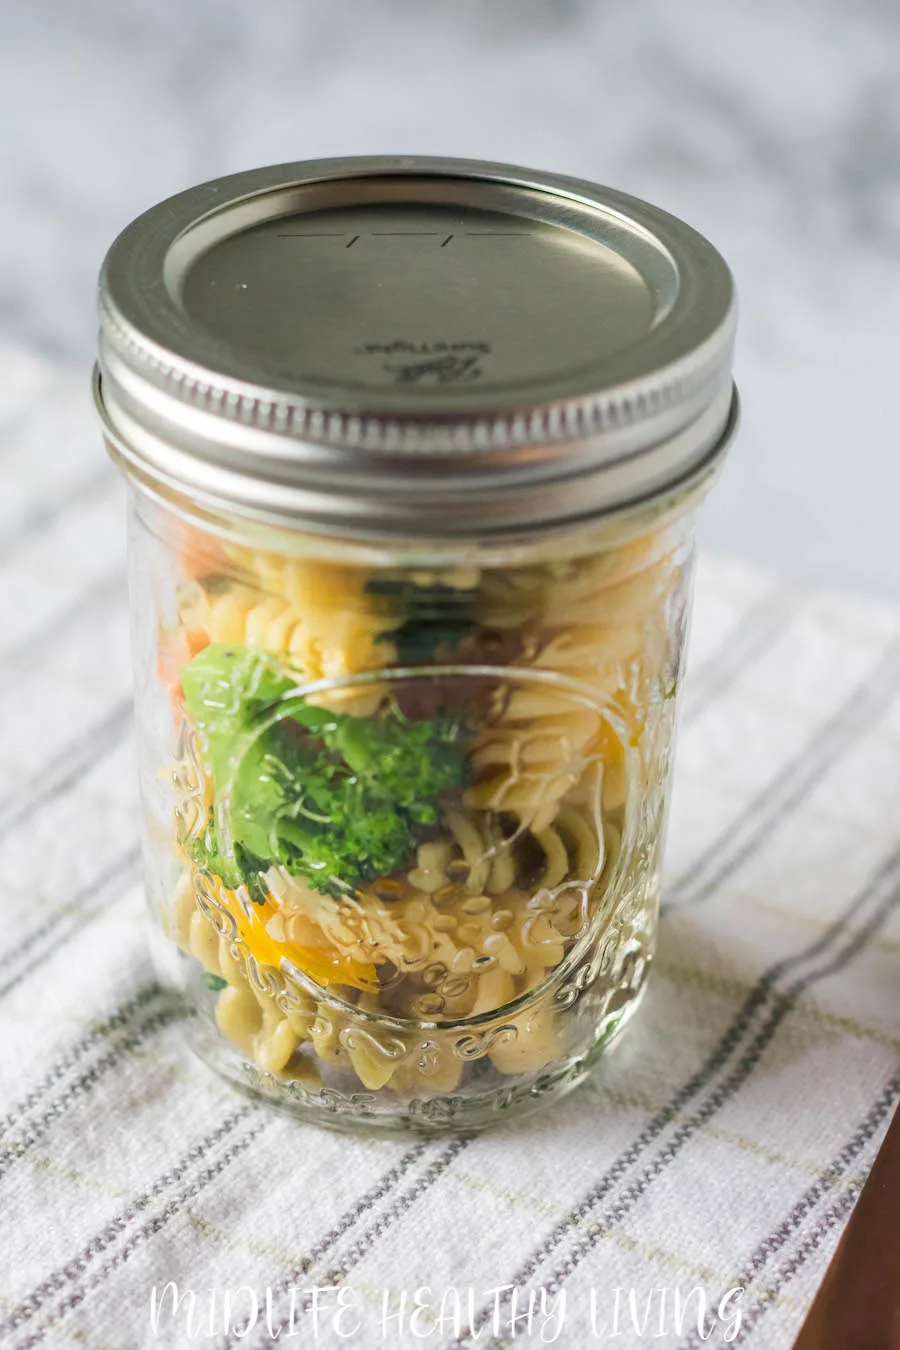 Featured image showing the finished pasta primavera salad in a jar ready to take for lunch!